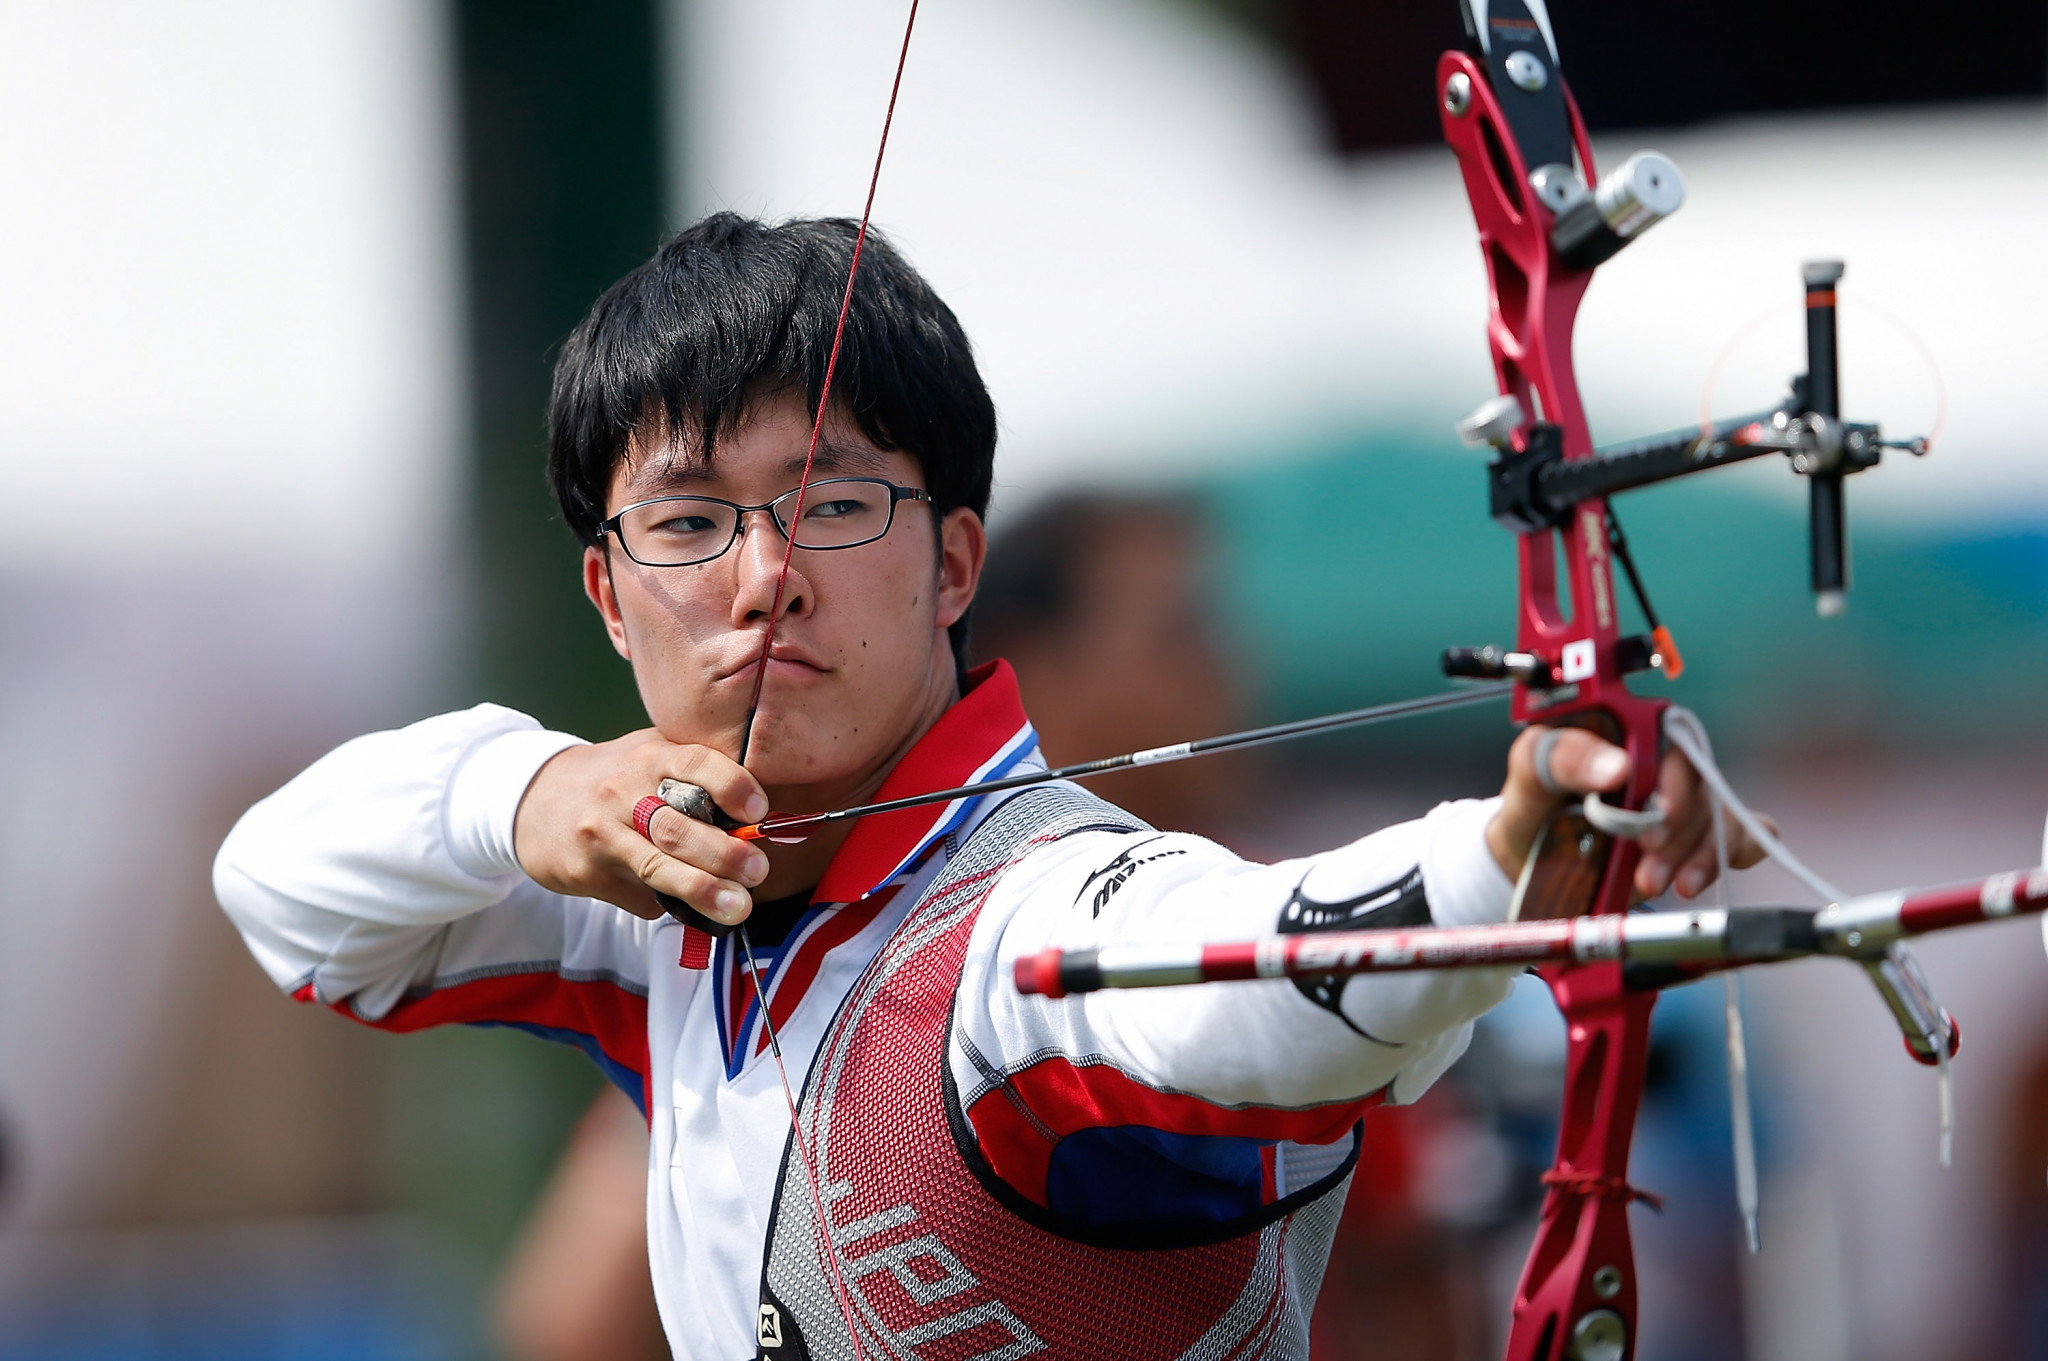 Japan's Hiroki Muto, pictured, and his partner Chinatsu Kubara were comprehensively beaten by South Korea in the final of the recurve event ©Getty Images